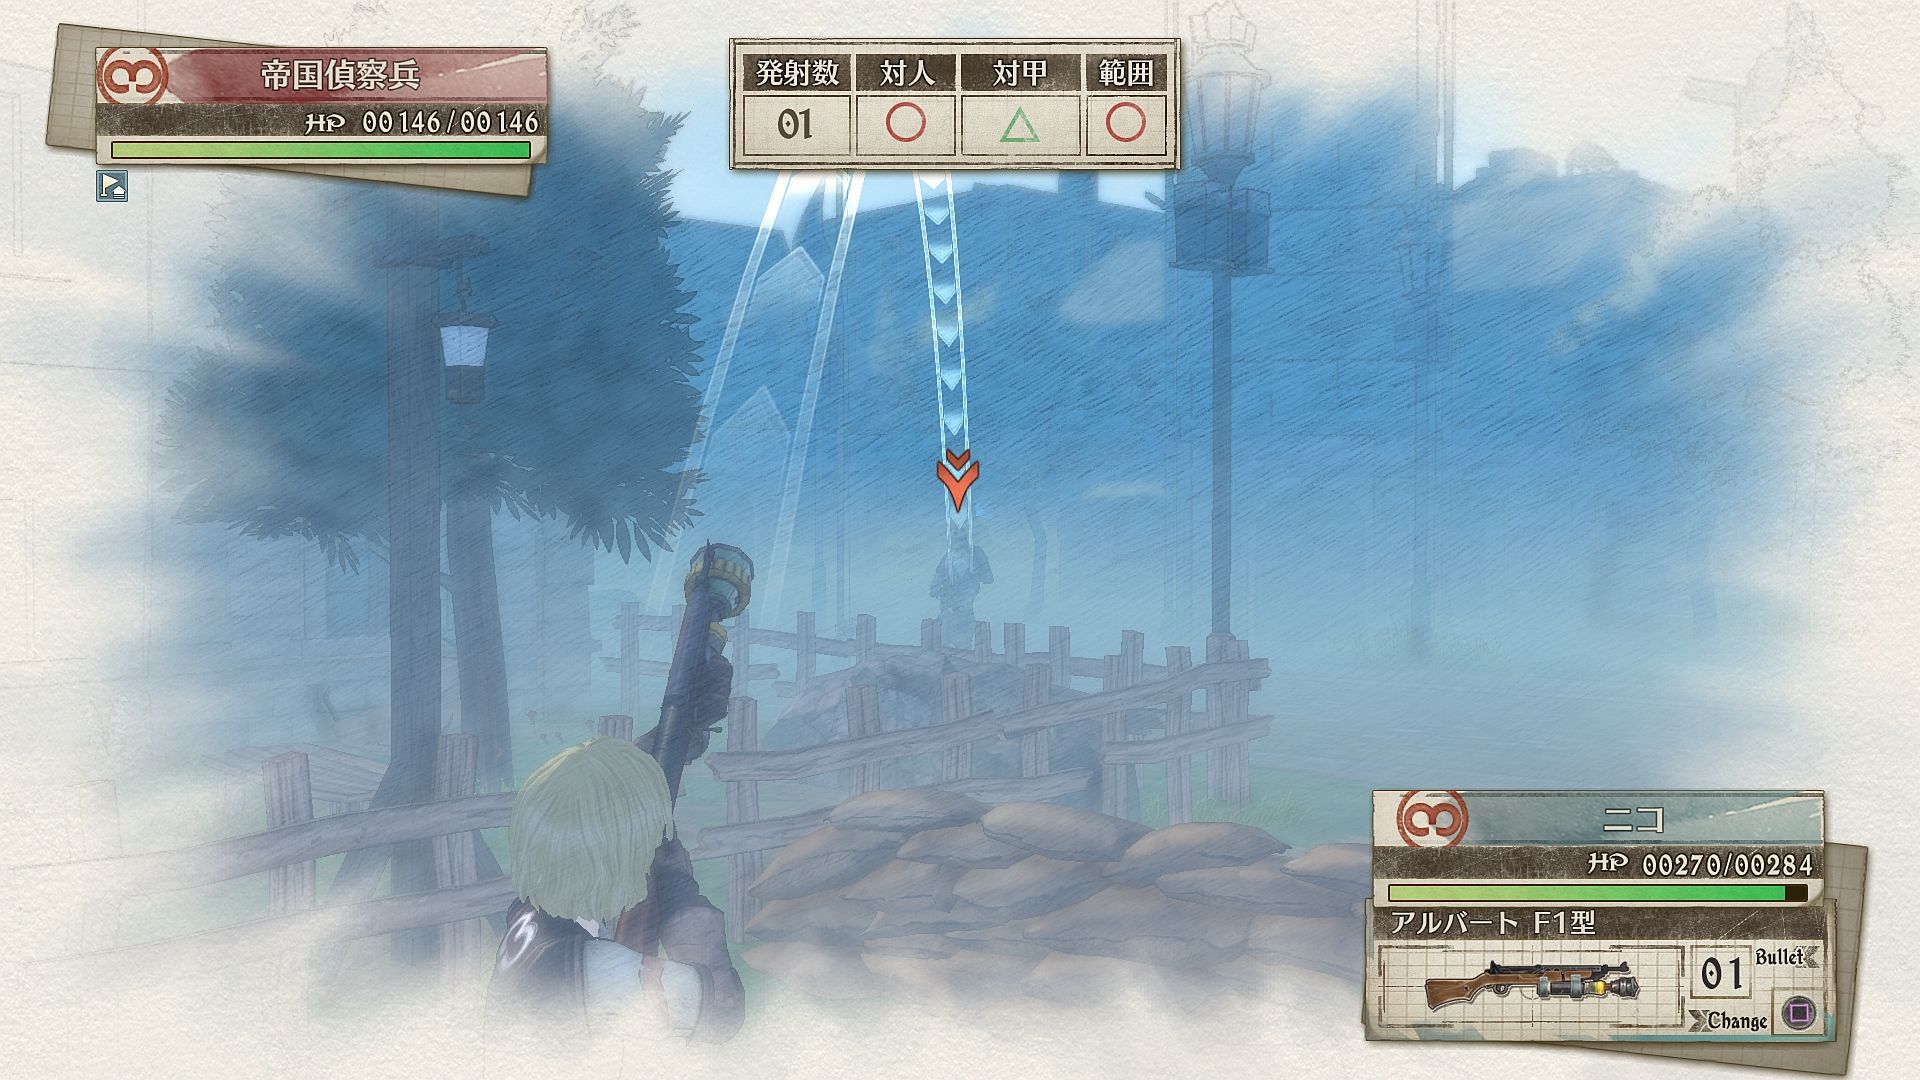 http://www.perfectly-nintendo.com/wp-content/gallery/valkyria-chronicles-4-17-01-2018/022.jpg